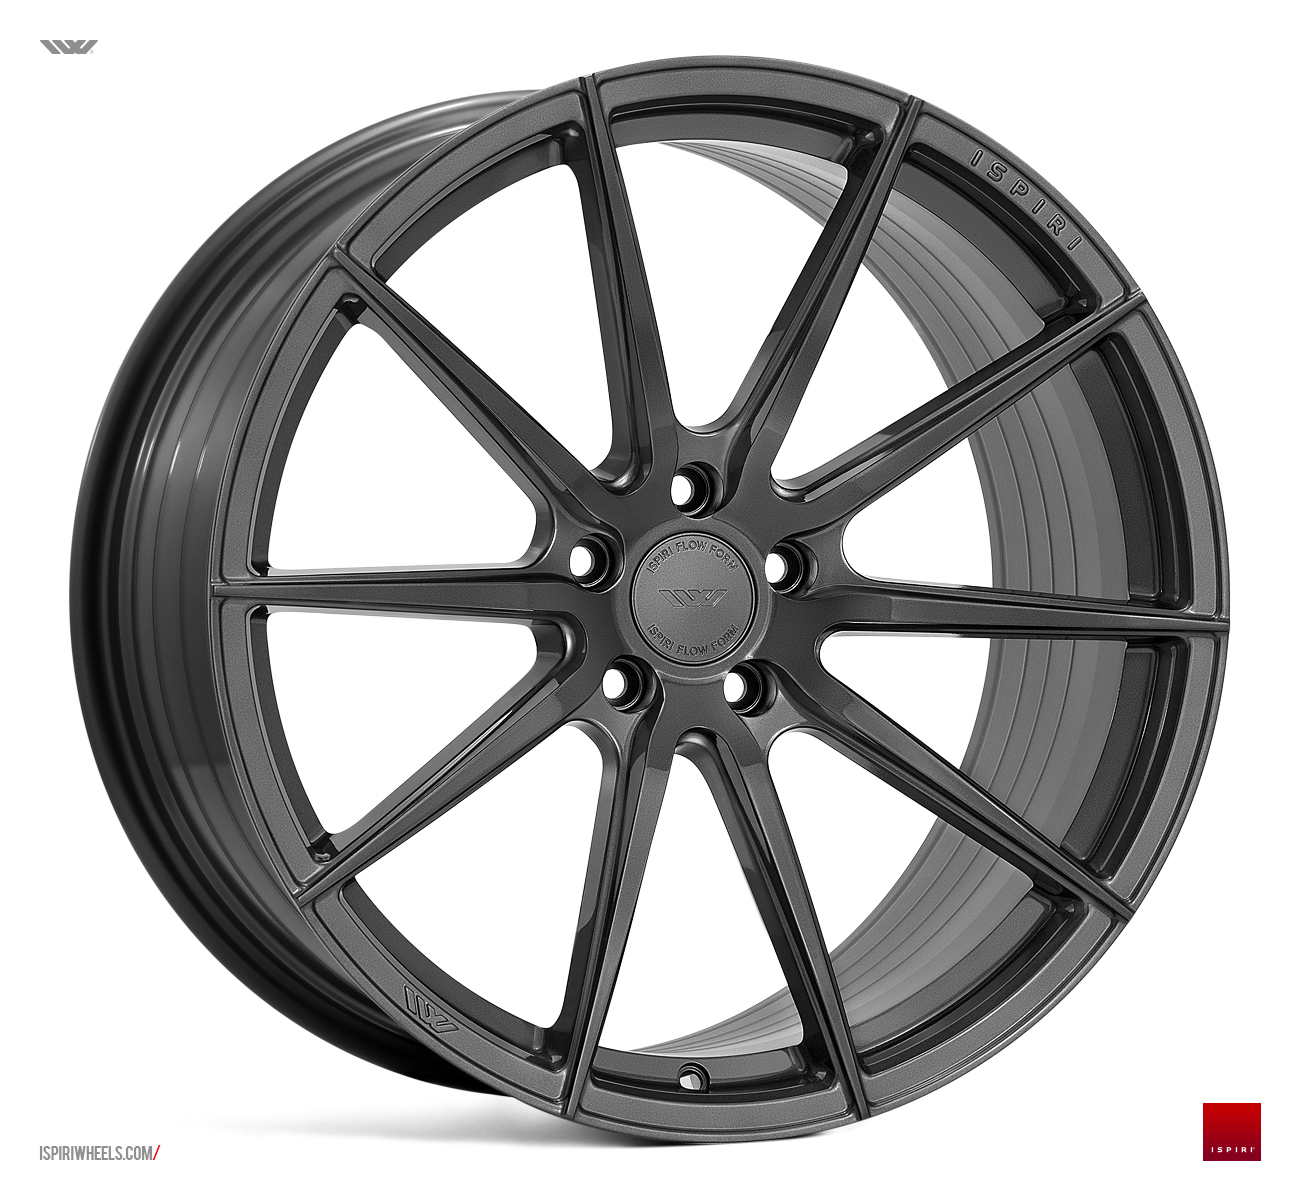 NEW 20" ISPIRI FFR1 MULTI-SPOKE ALLOY WHEELS IN CARBON GRAPHITE, DEEPER CONCAVE REARS - VARIOUS FITMENTS AVAILABLE